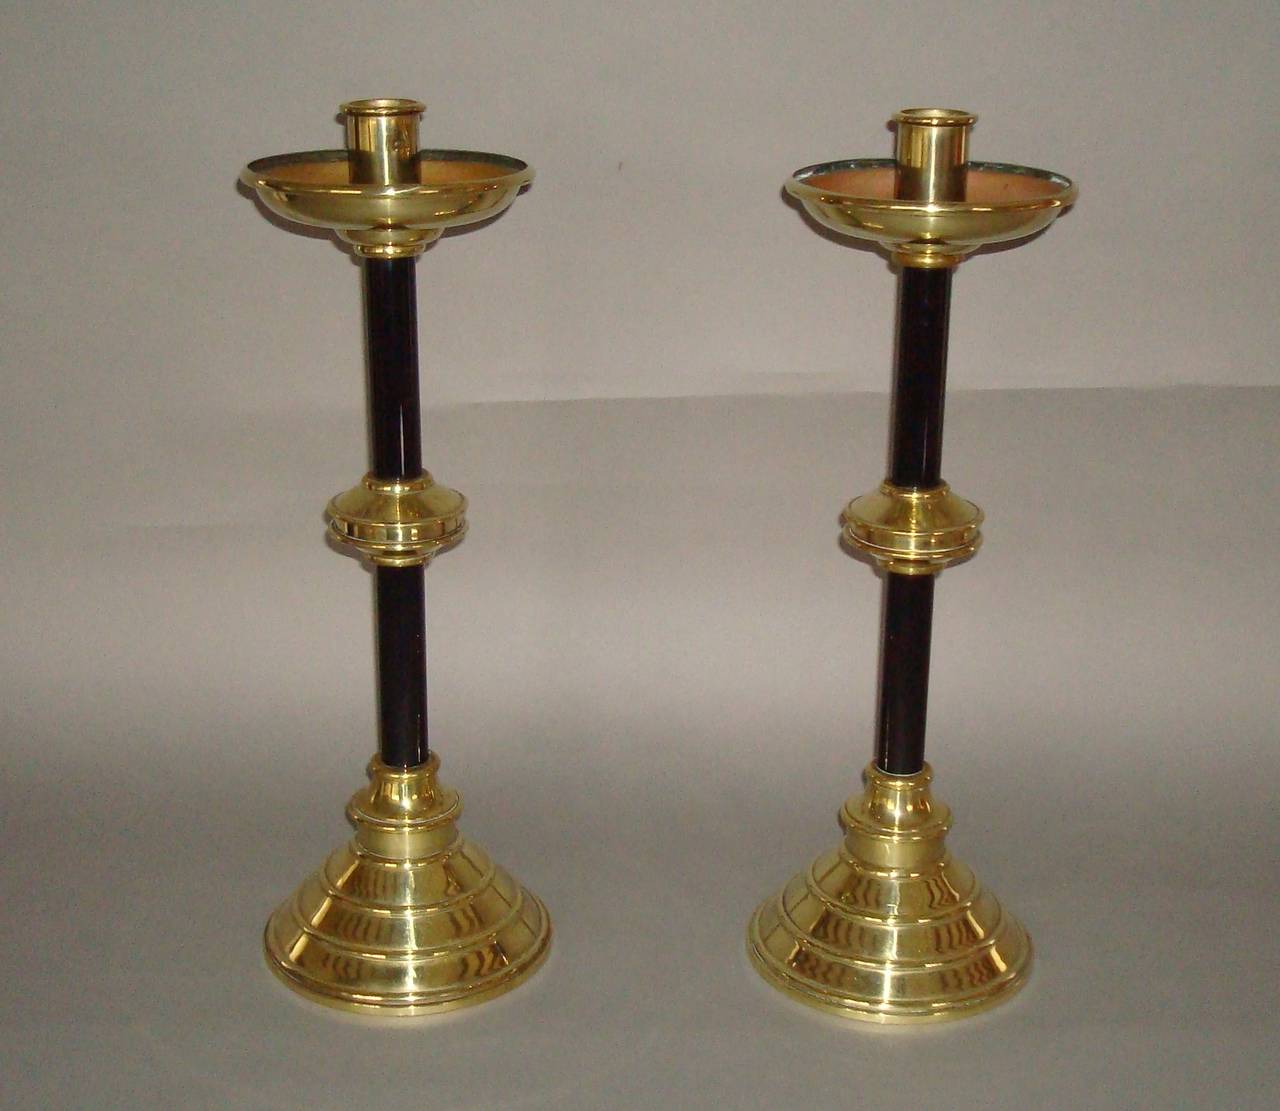 A C19th pair of candlesticks of ecclesiastical design, stamped 